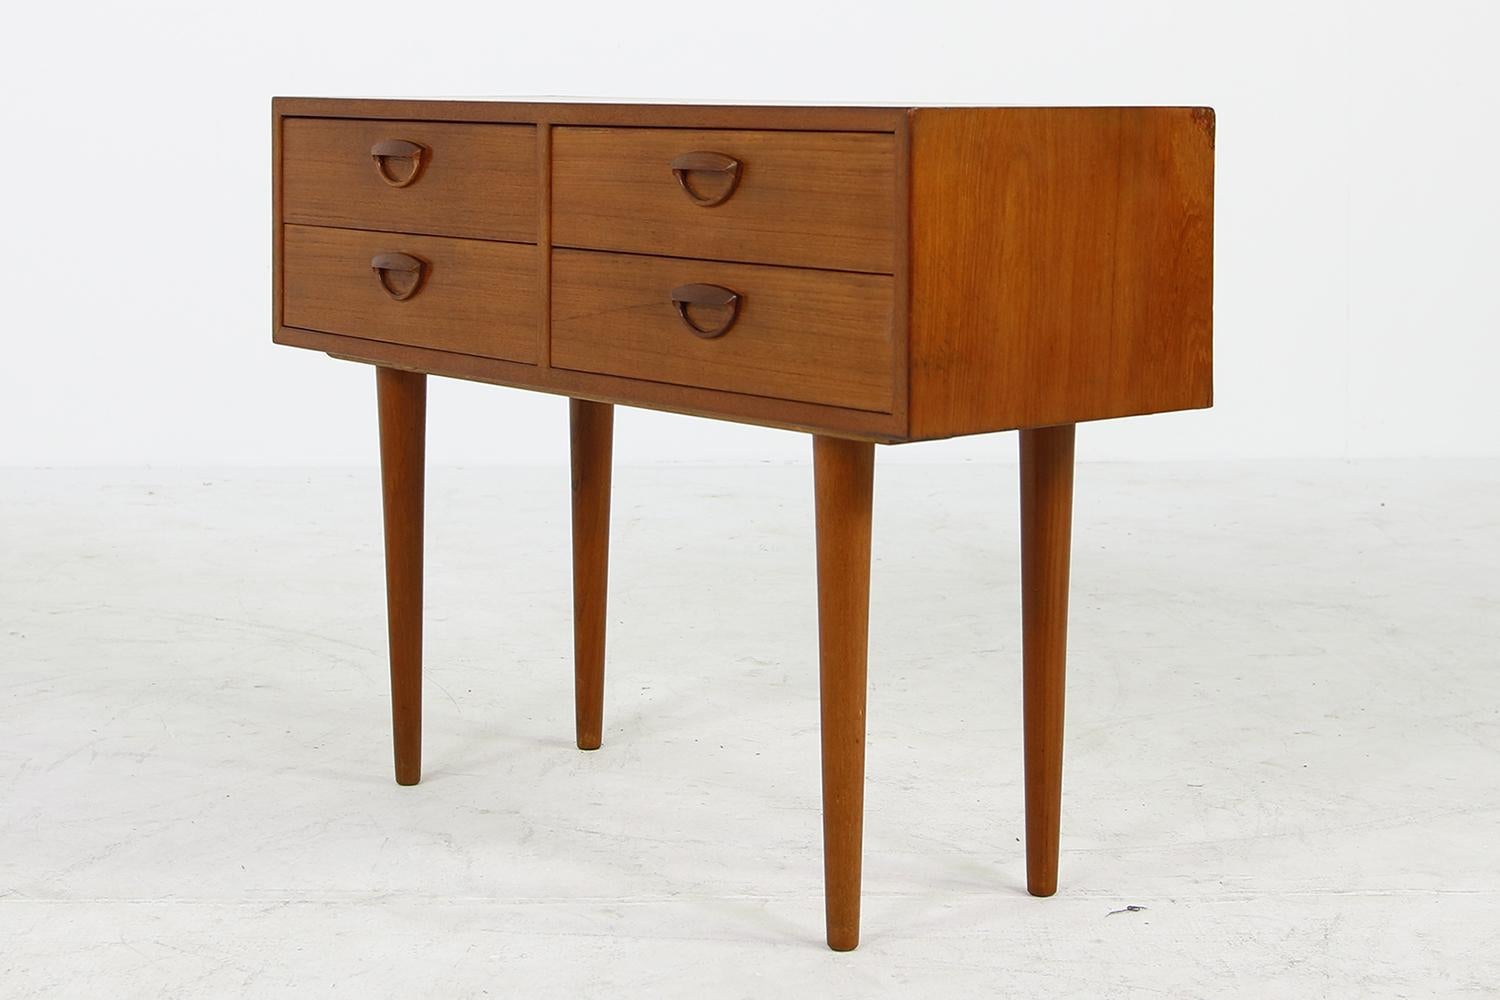 Beautiful 1960s chest of drawers by Kai Kristiansen, good vintage condition, authentic and nice vintage item with fantastic patina. Drawers work well, clean inside.